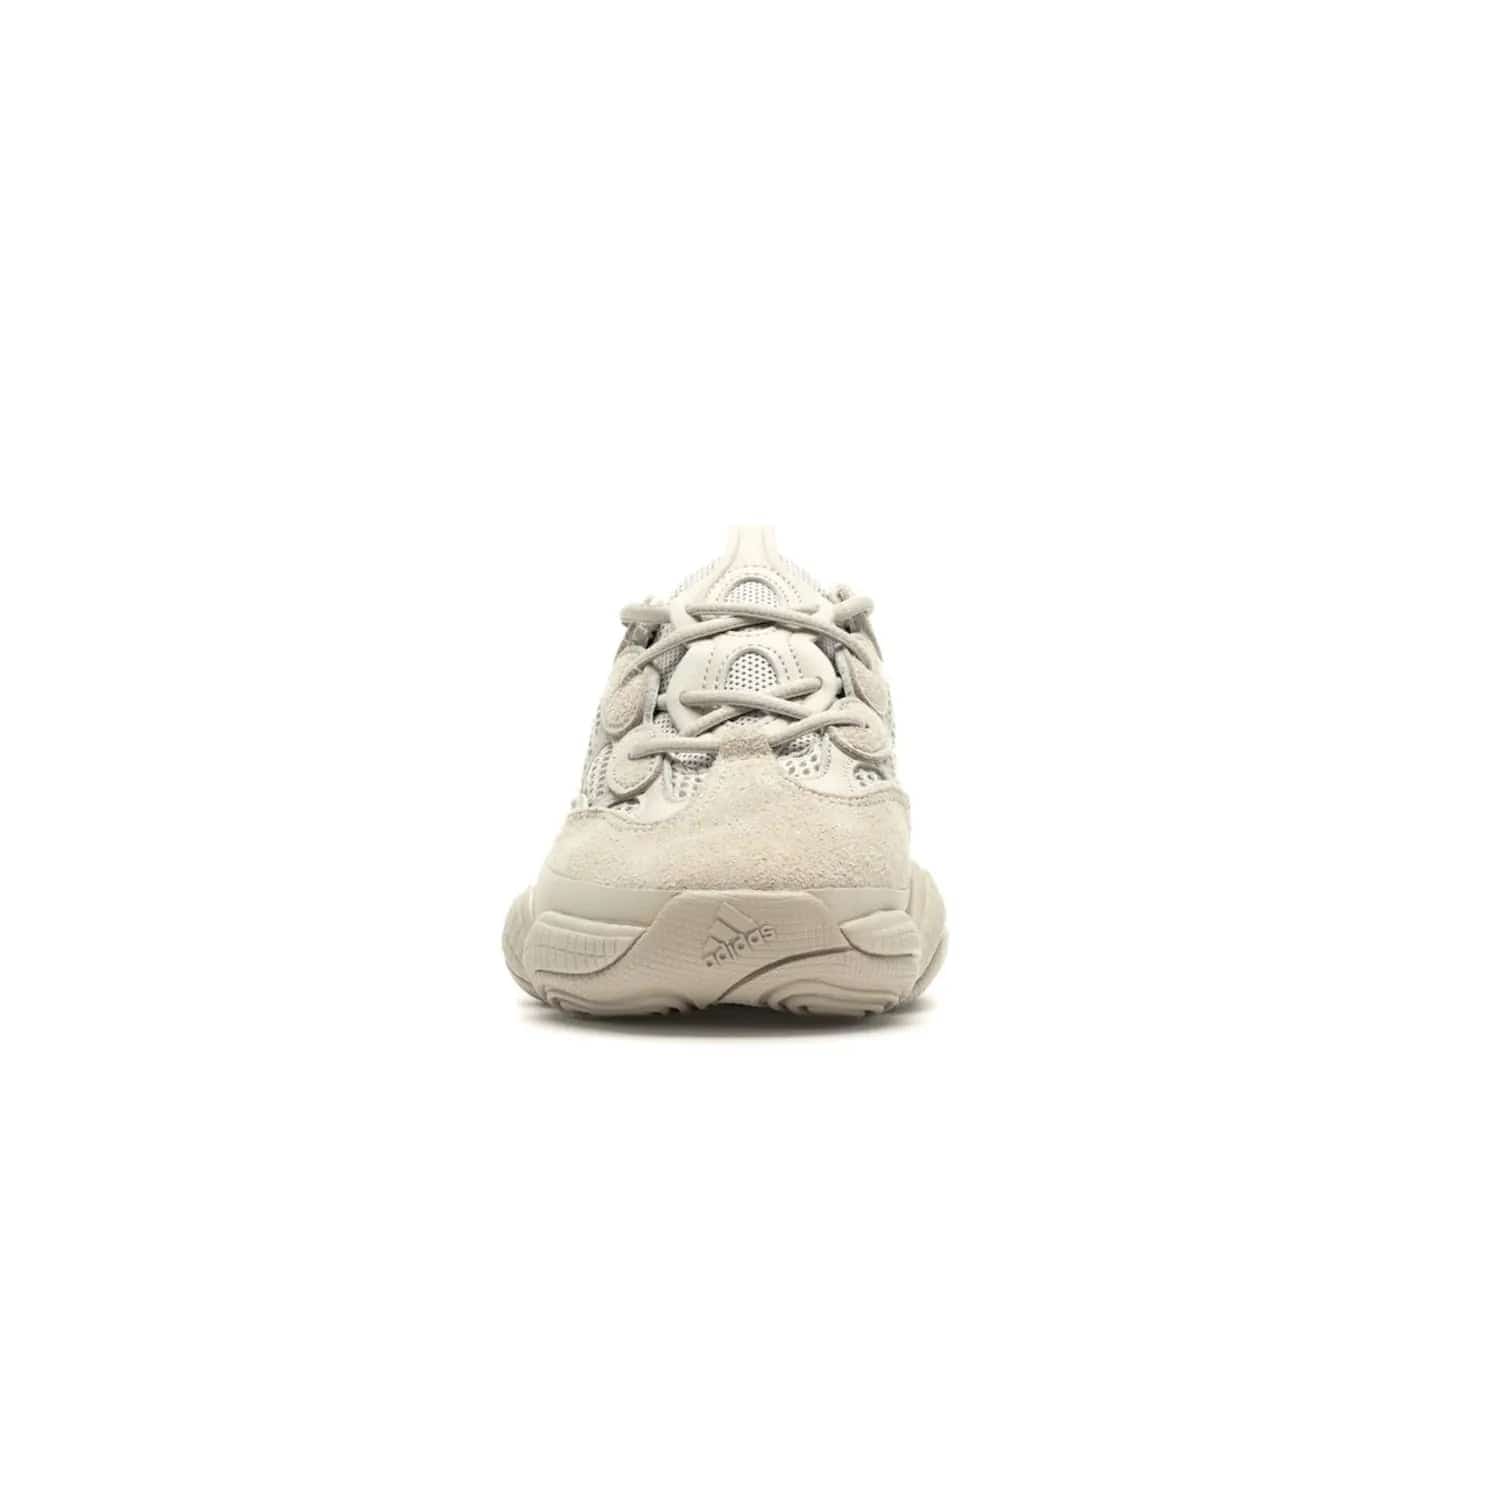 adidas Yeezy 500 Blush - Image 10 - Only at www.BallersClubKickz.com - Step up your sneaker game with the Adidas Yeezy 500 Blush. Monochromatic pale pink palette, hiking-inspired suede/mesh construction, plus adiPRENE sole for comfort and performance. Get the Adidas Yeezy 500 and experience true style and comfort.